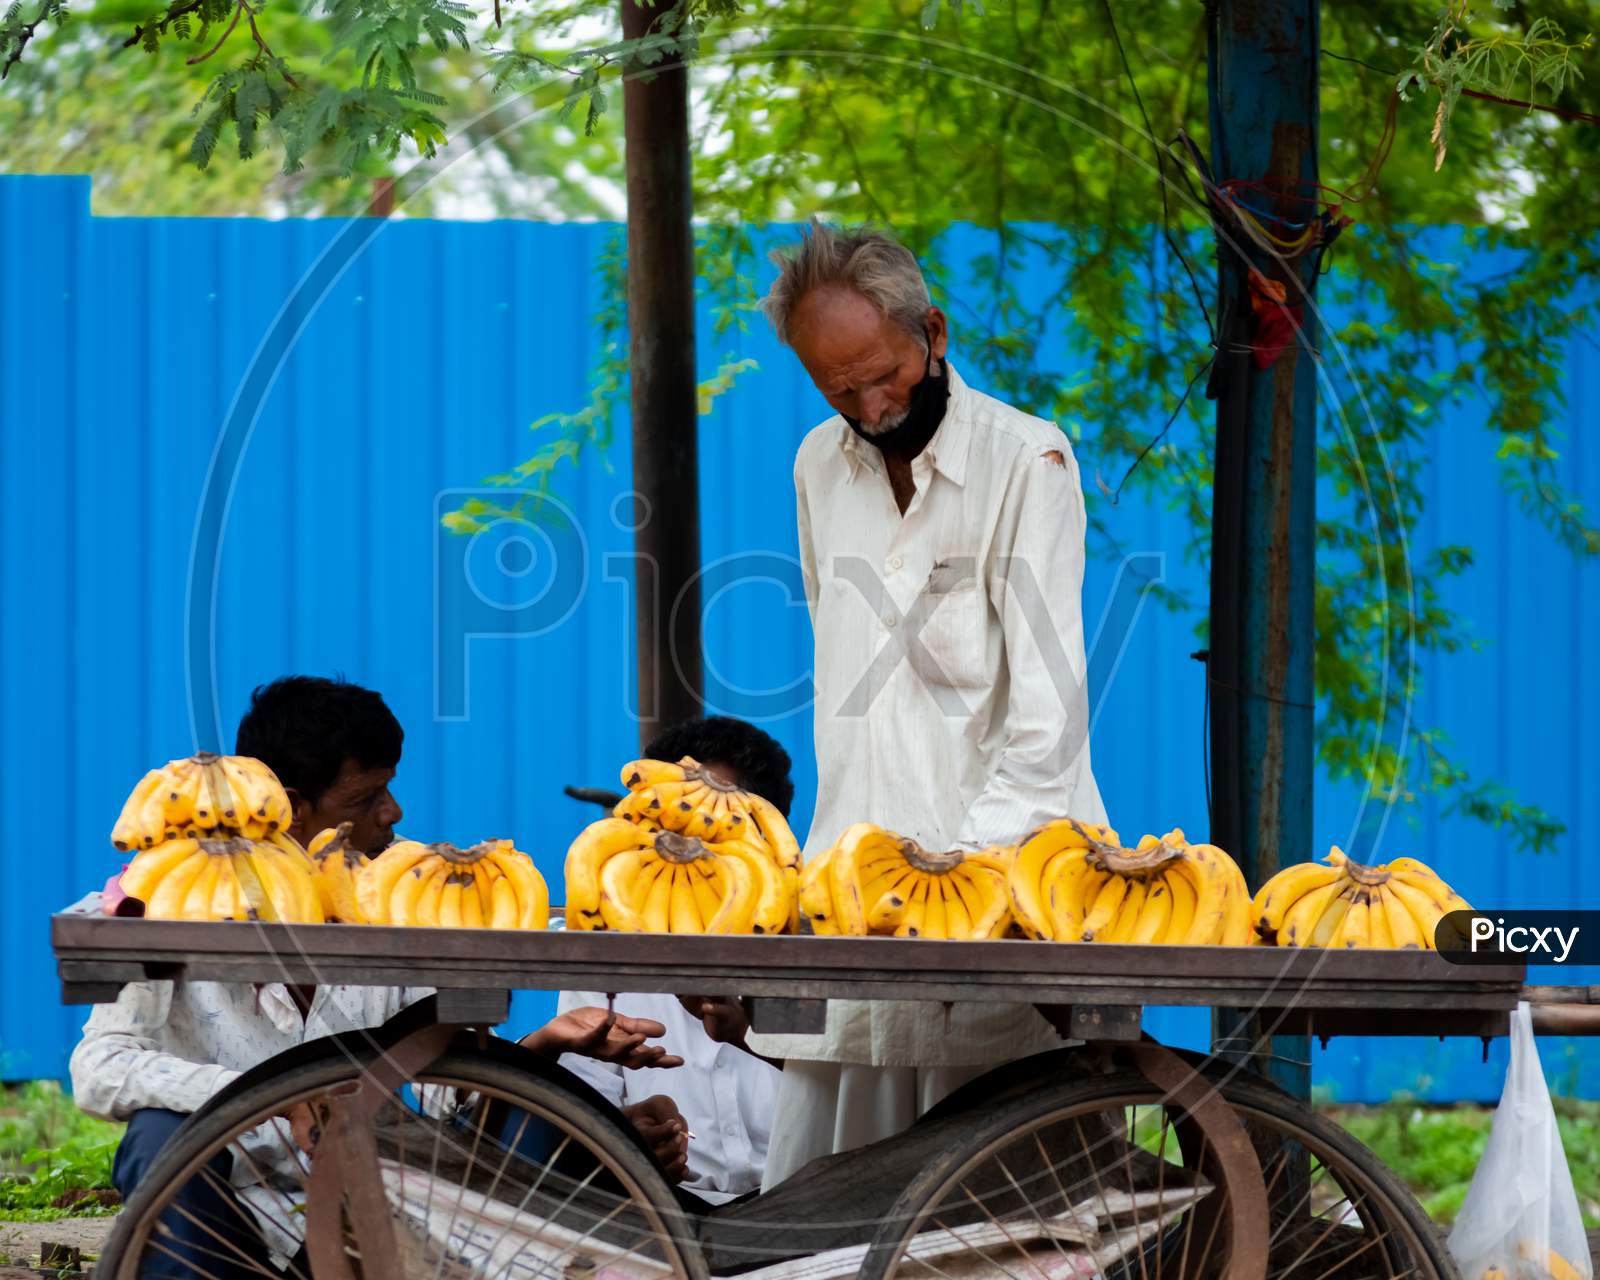 Old man selling fruits on the street.